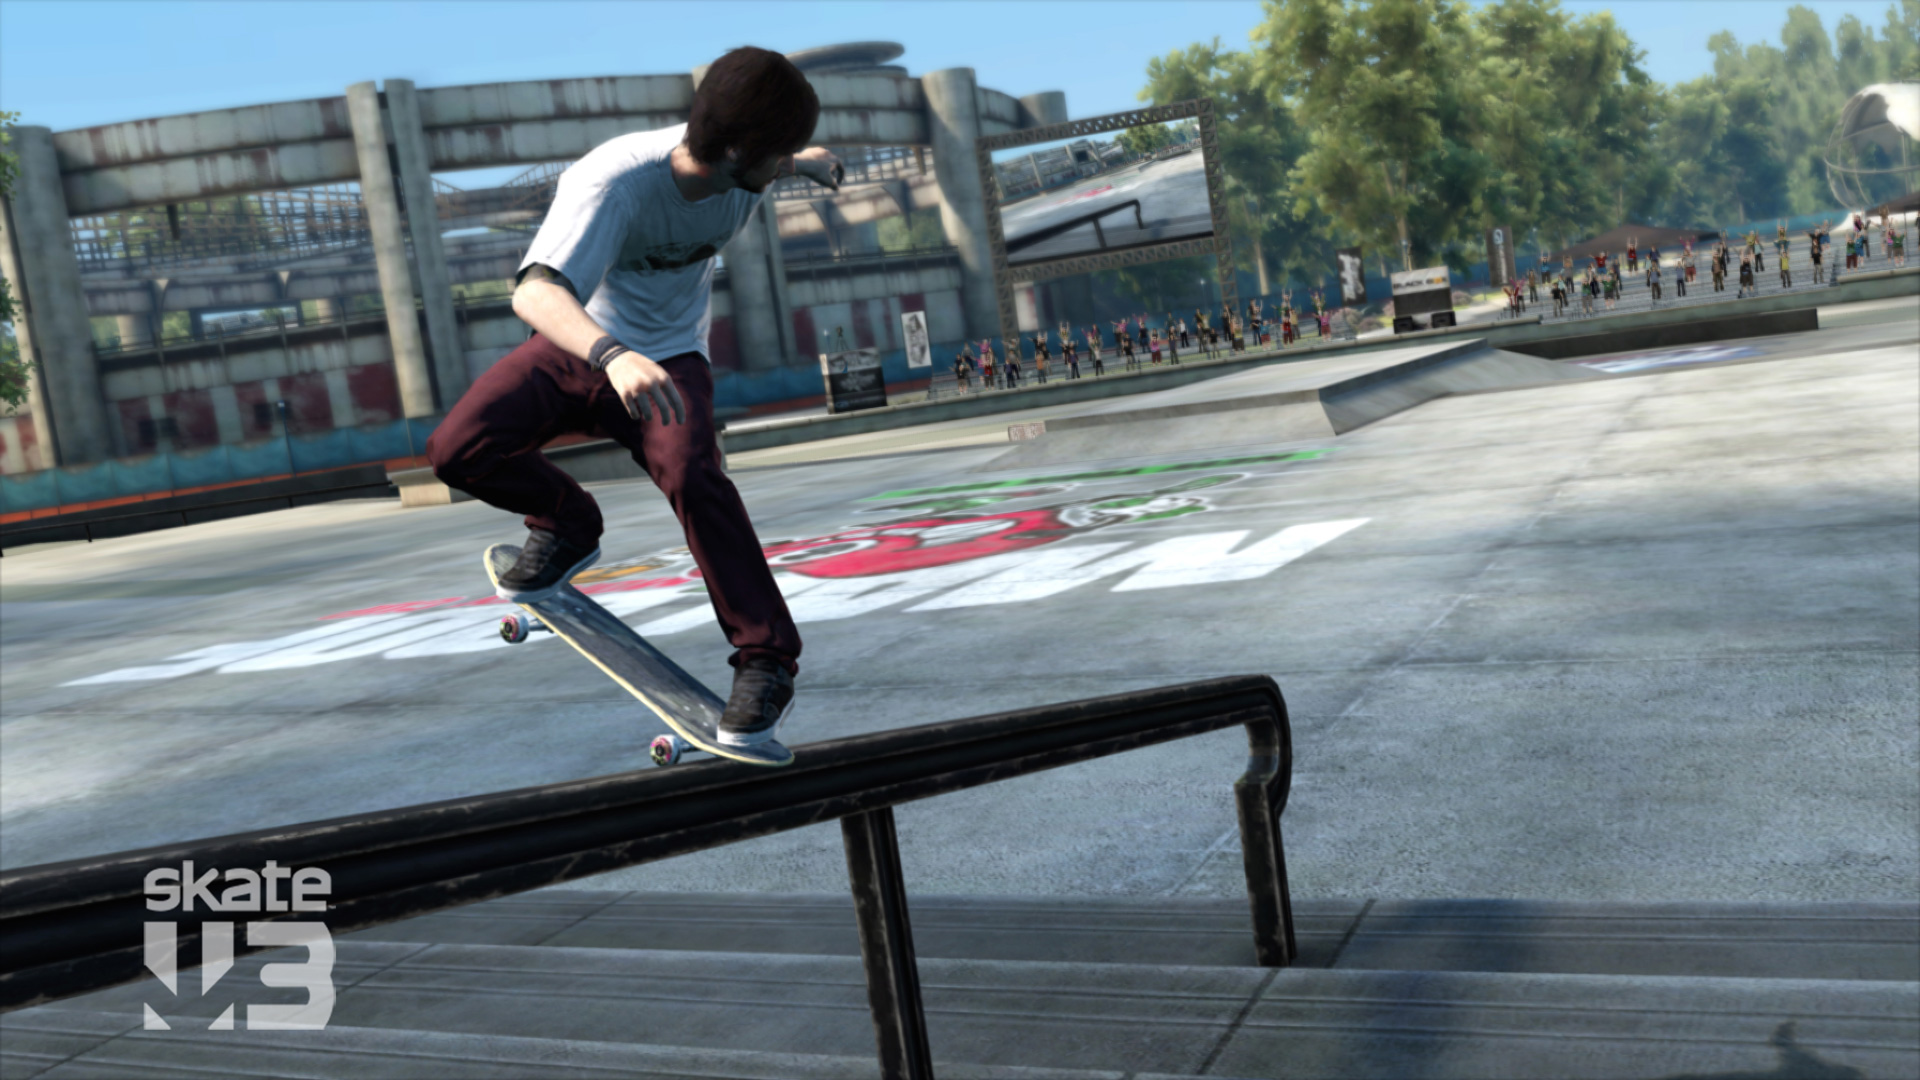 Is there a game similar to Skate 3 on Steam? : r/skate3